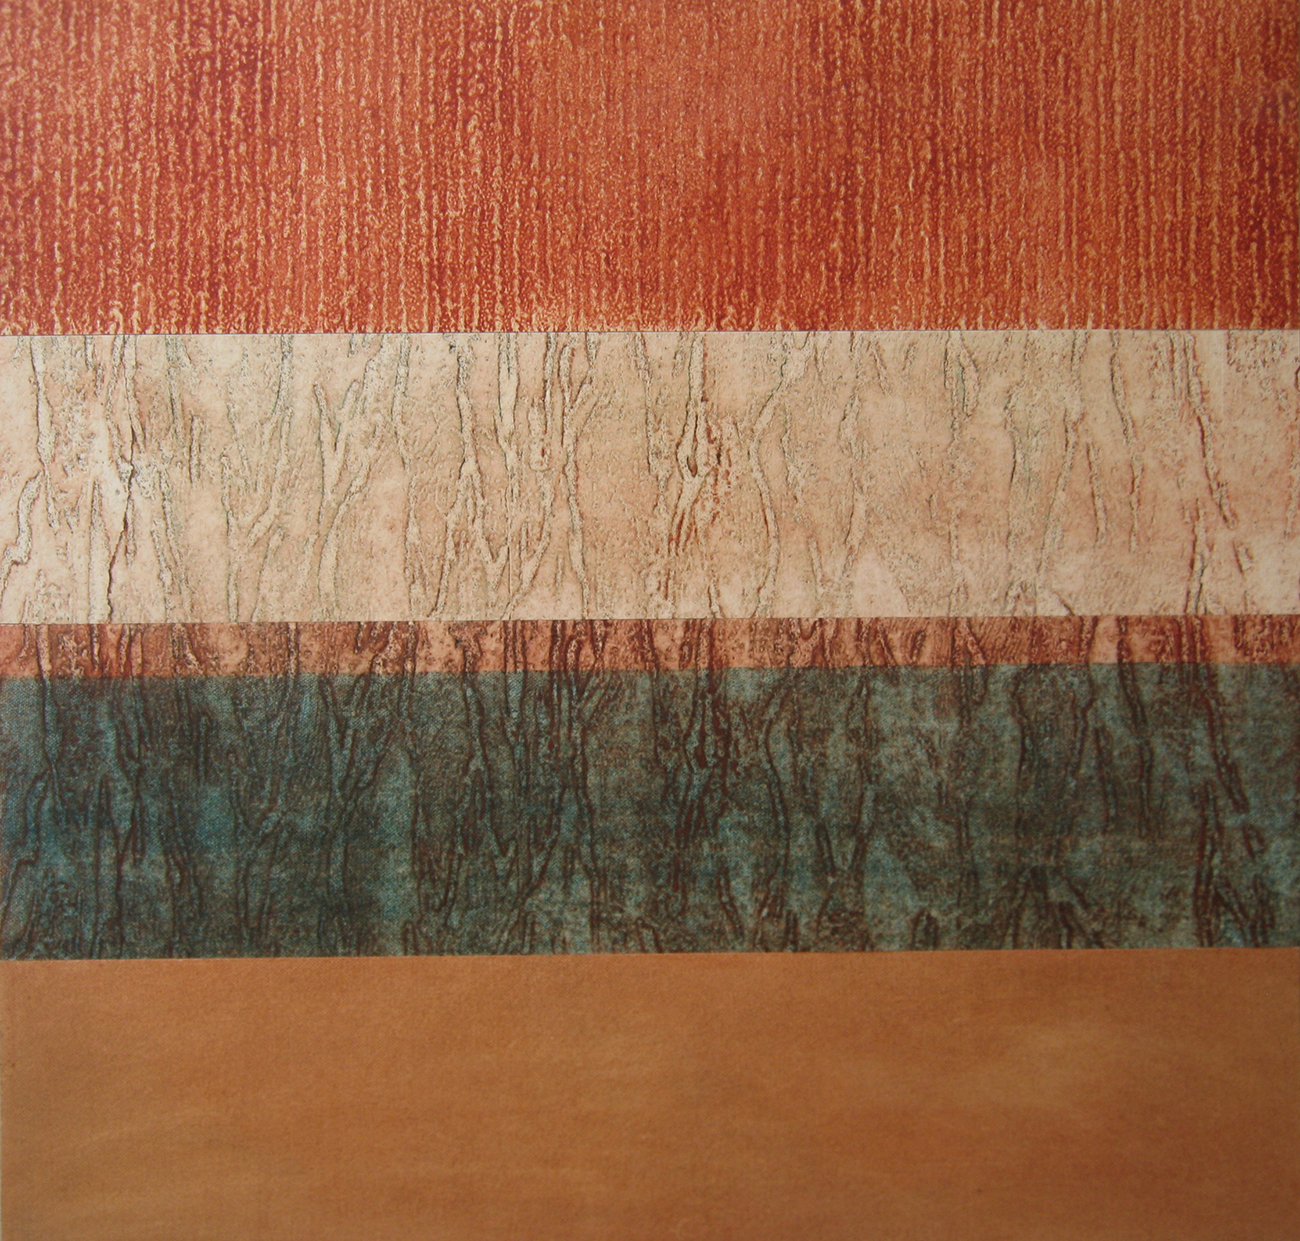 Stripes 20 - 46x48 - collagraph and collage